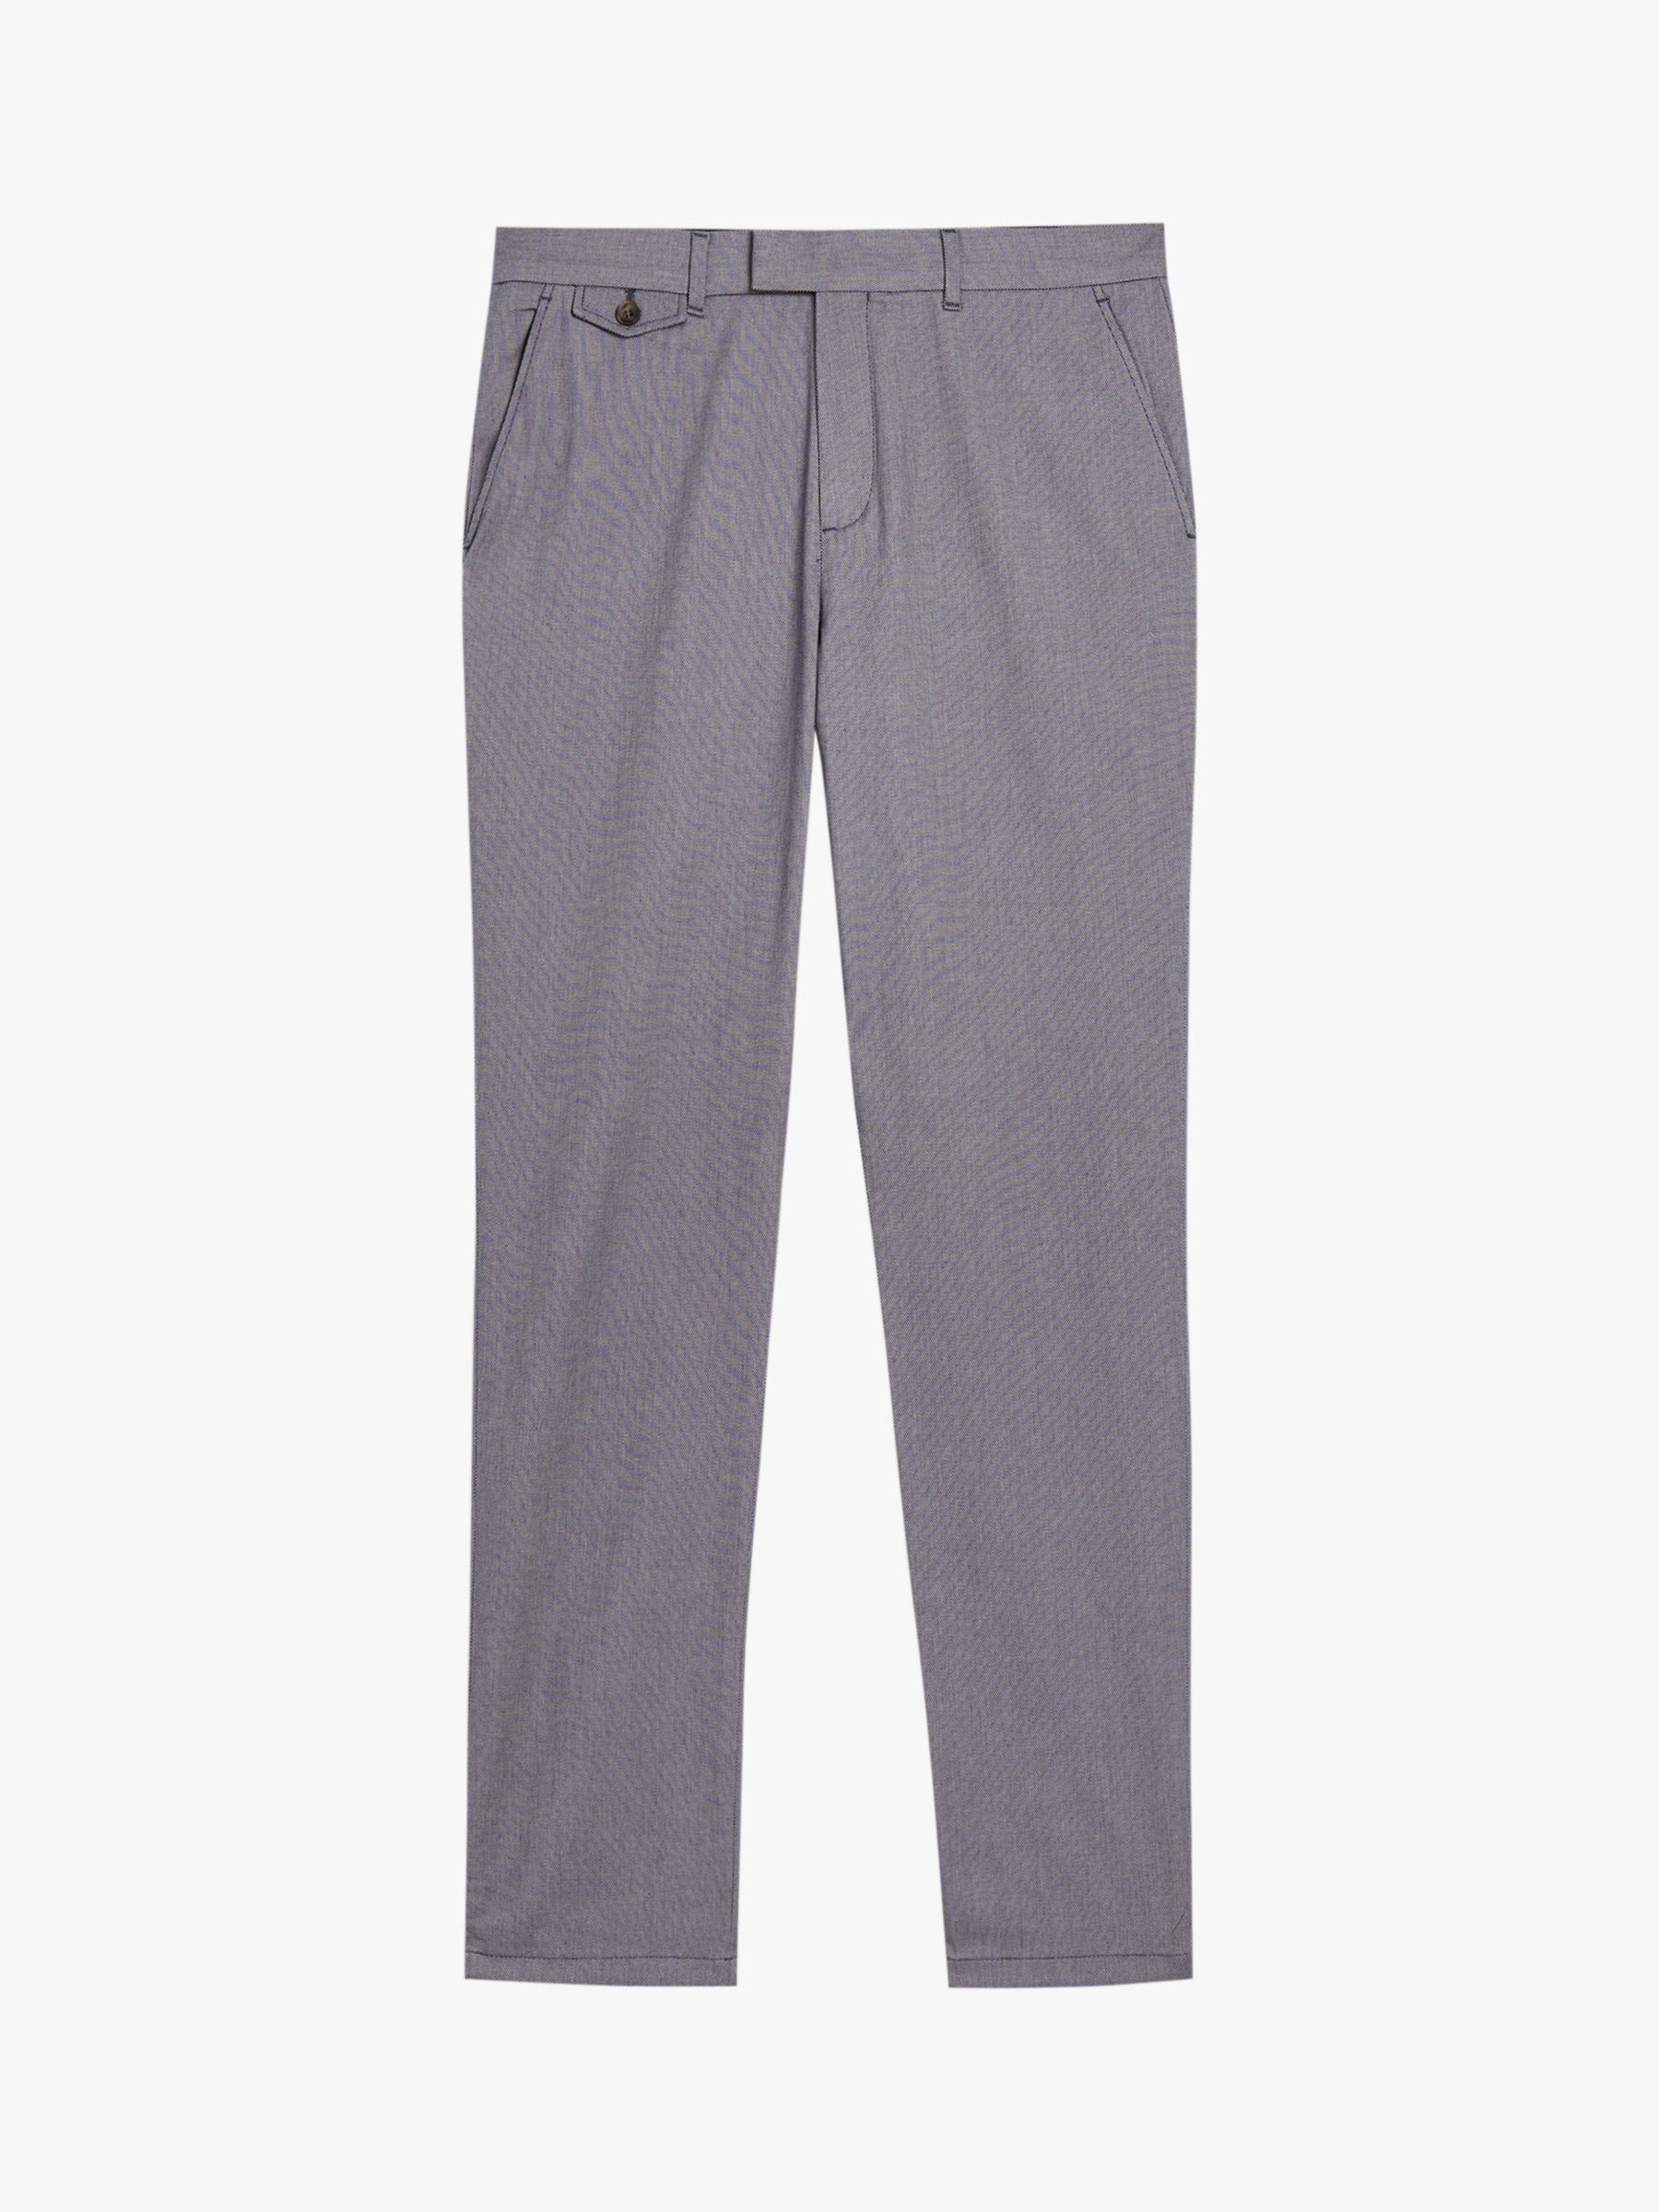 Buy Ted Baker Turney Slim Fit Dobby Chinos Online at johnlewis.com